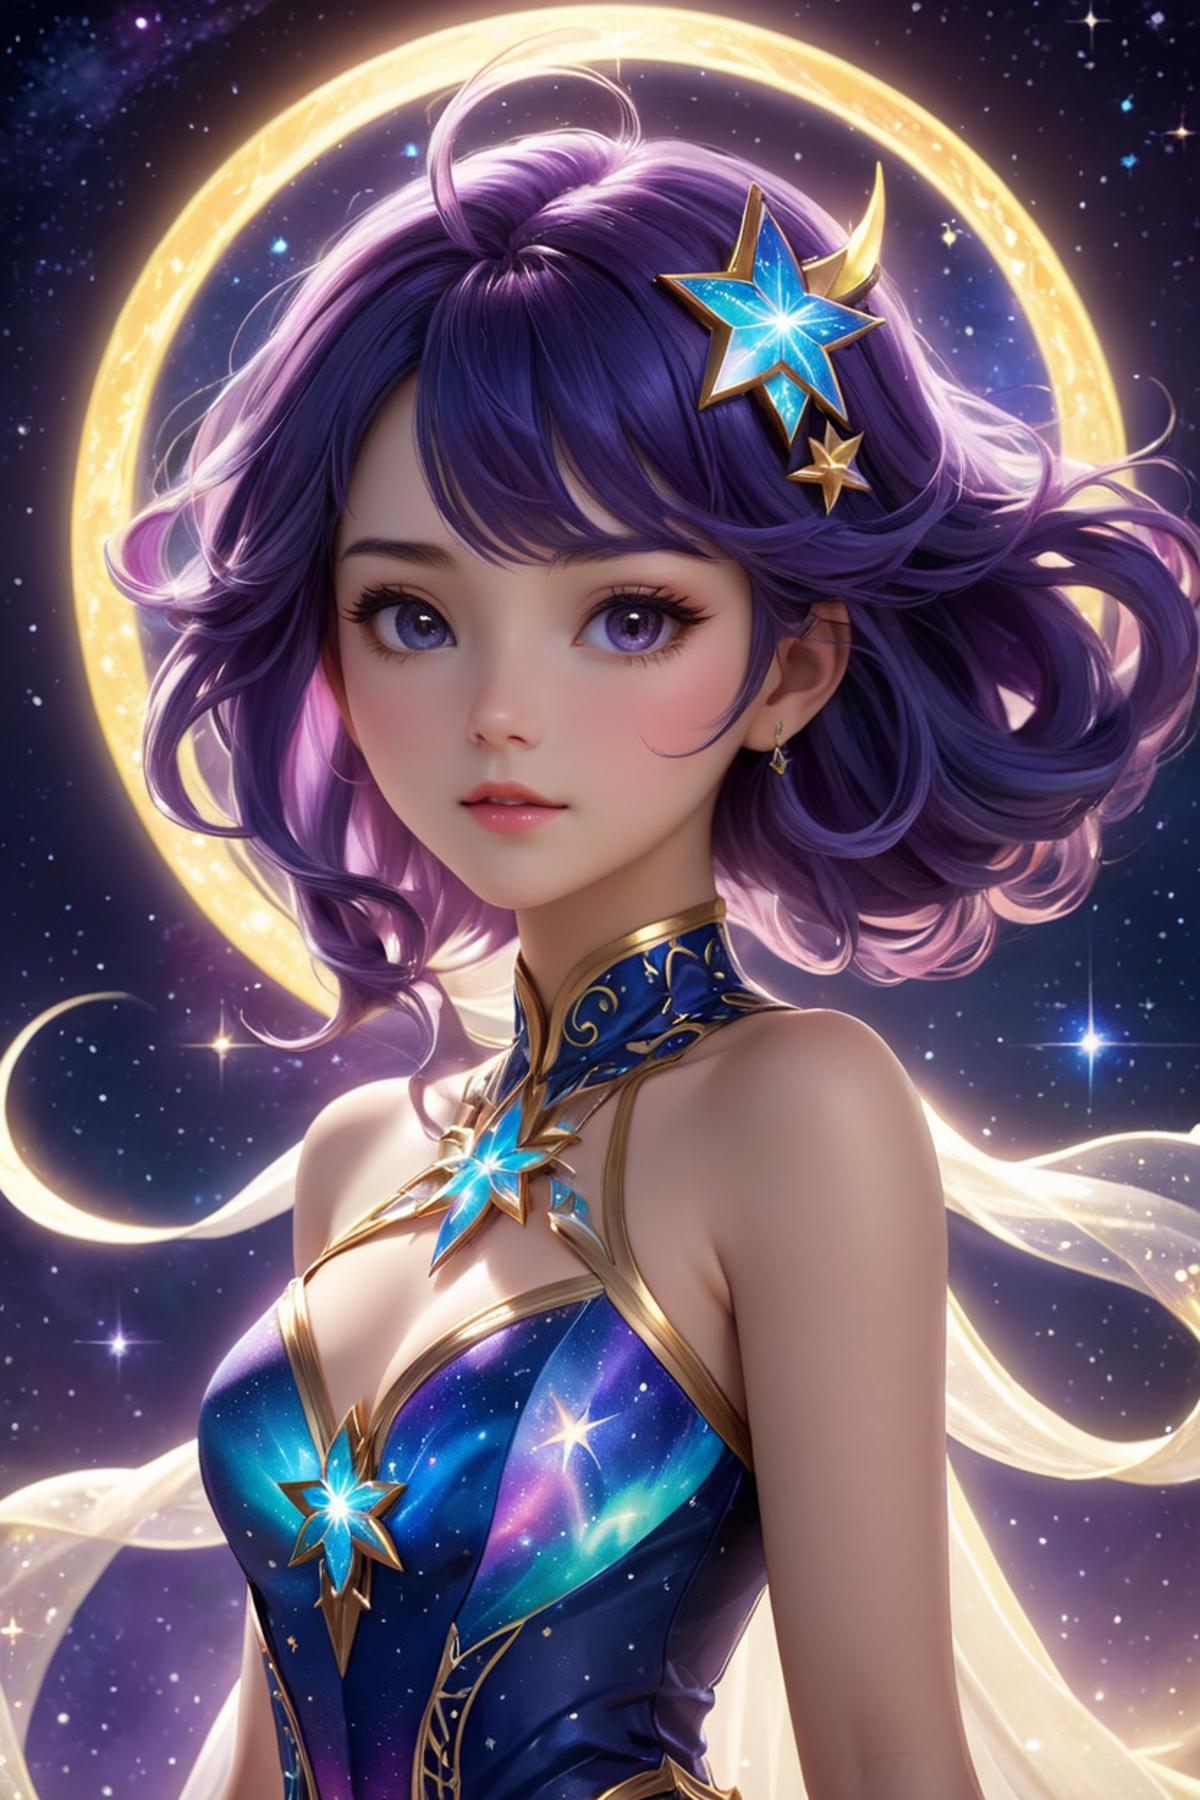 Anime girl with purple hair and a blue dress with a white star on her head.